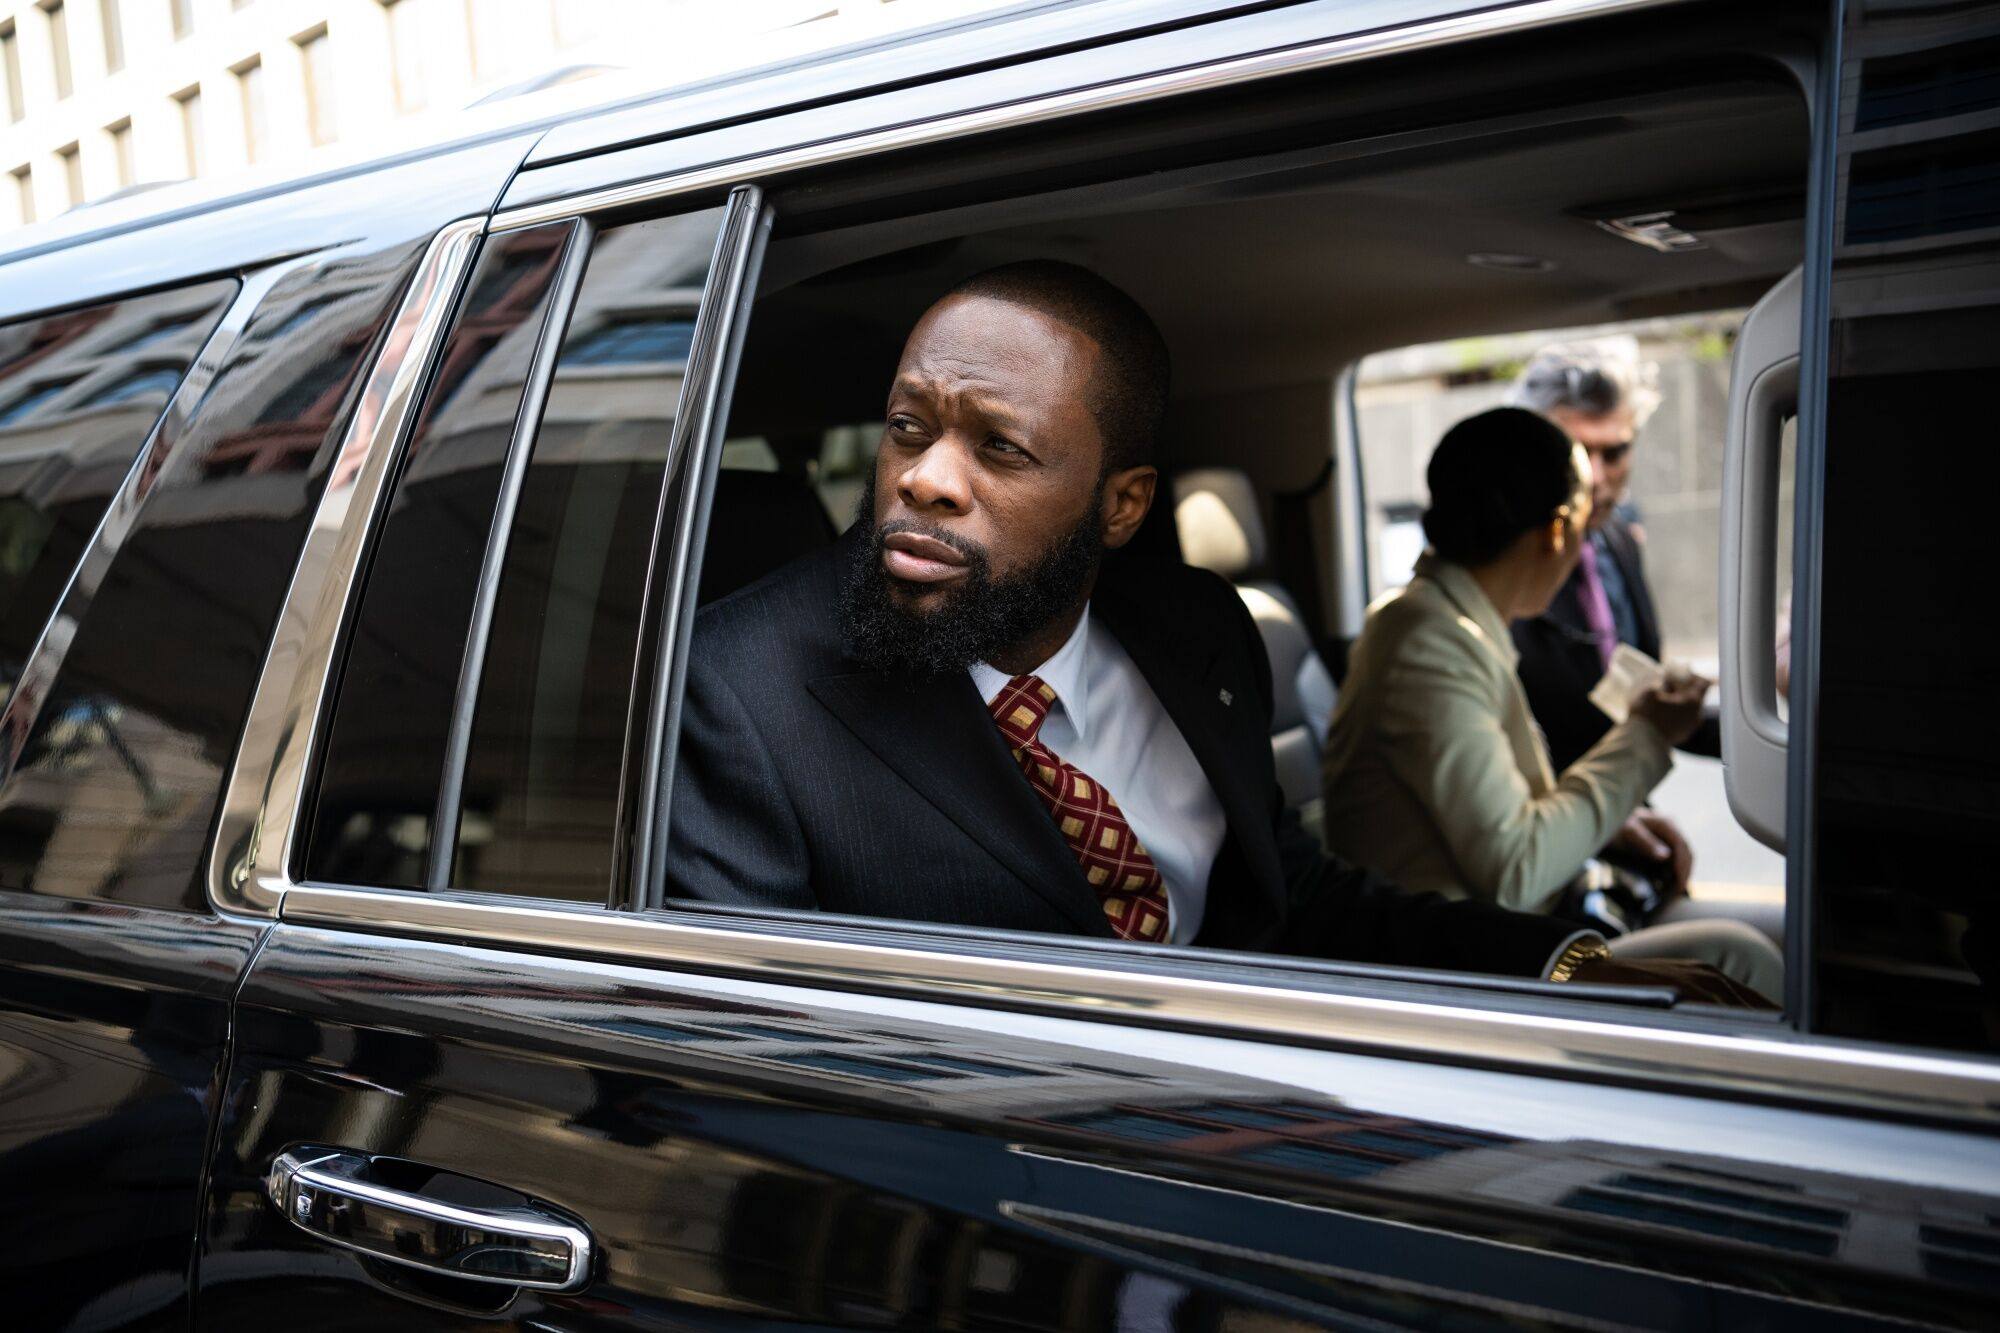 Rapper Pras Michel exits federal court in Washington on April 3. Photo: Bloomberg